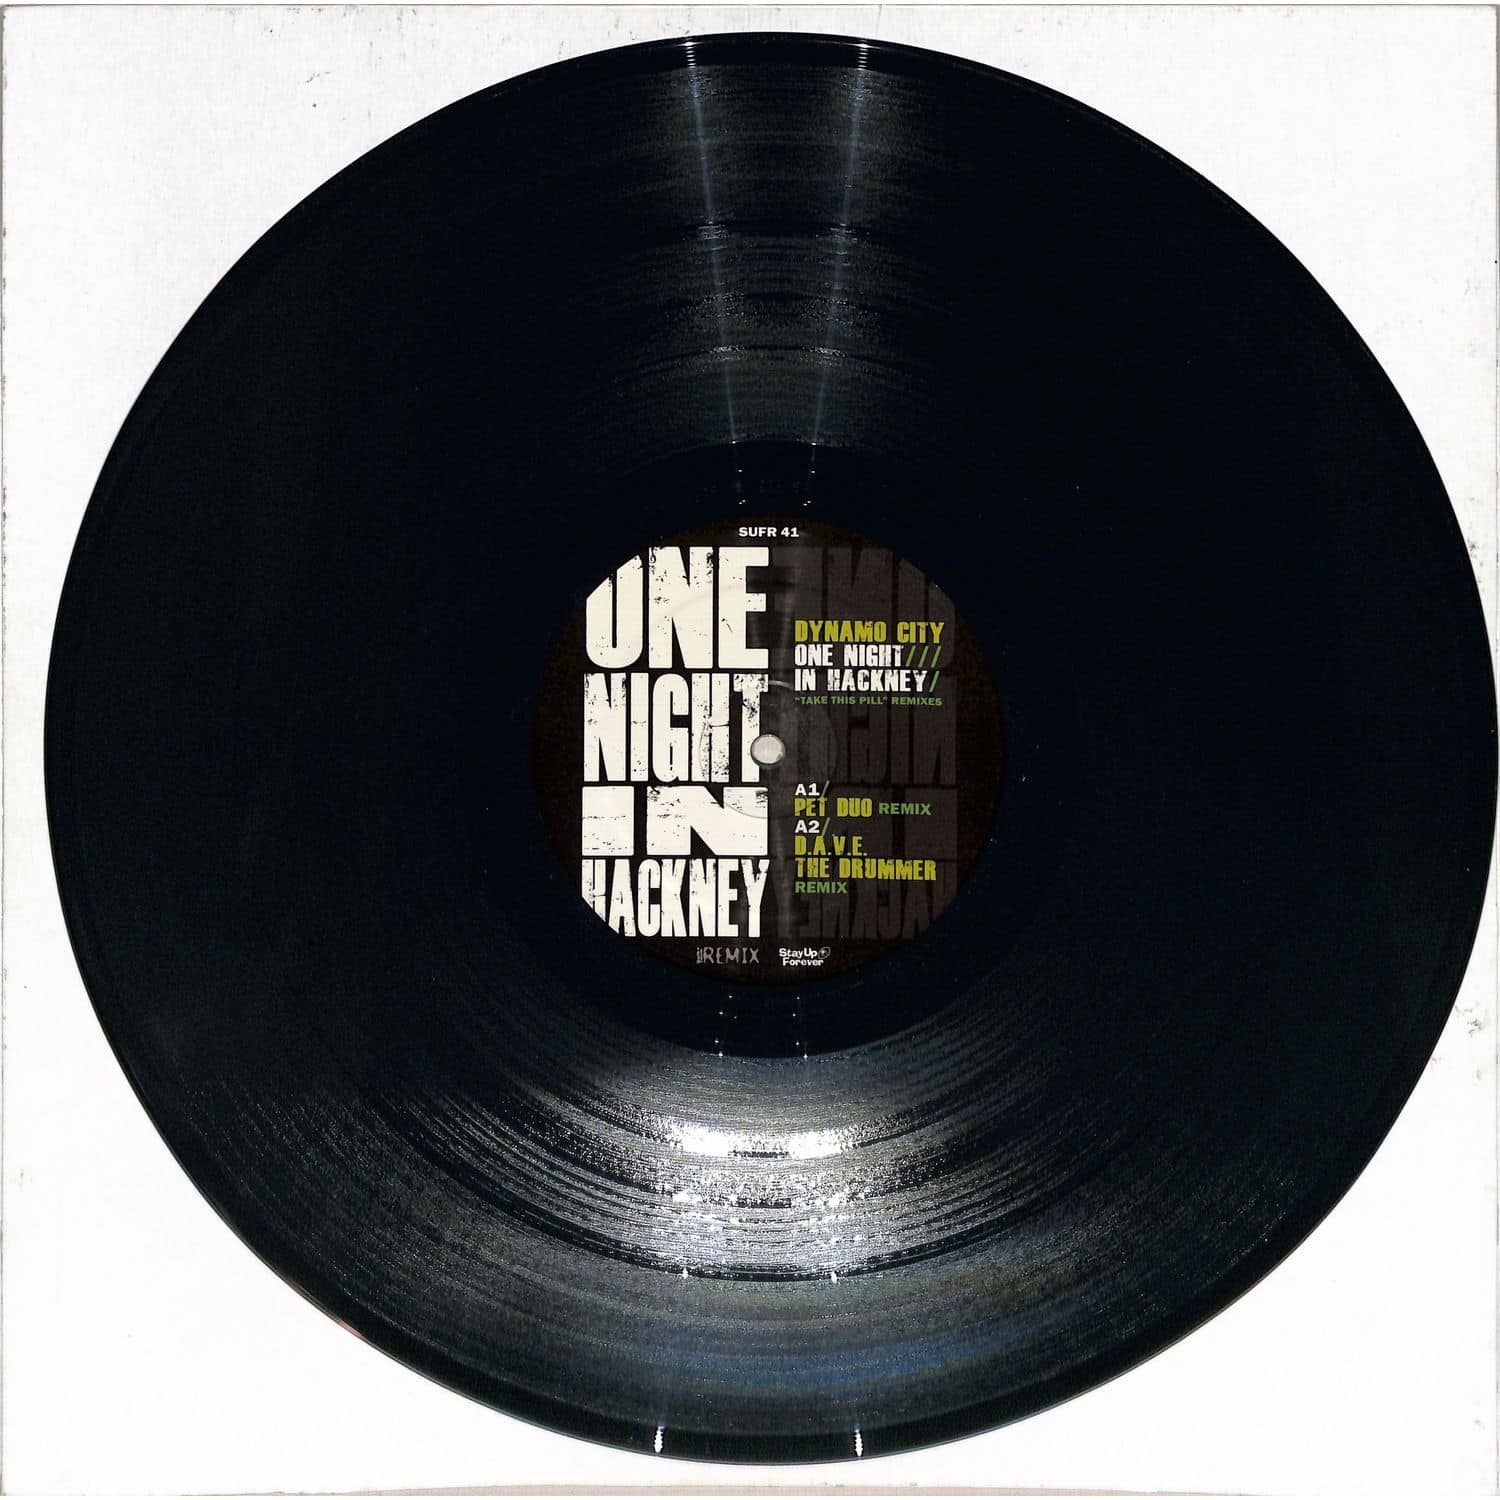 Dynamo City - ONE NIGHT IN HACKNEY - TAKE THIS PILL REMIXES 